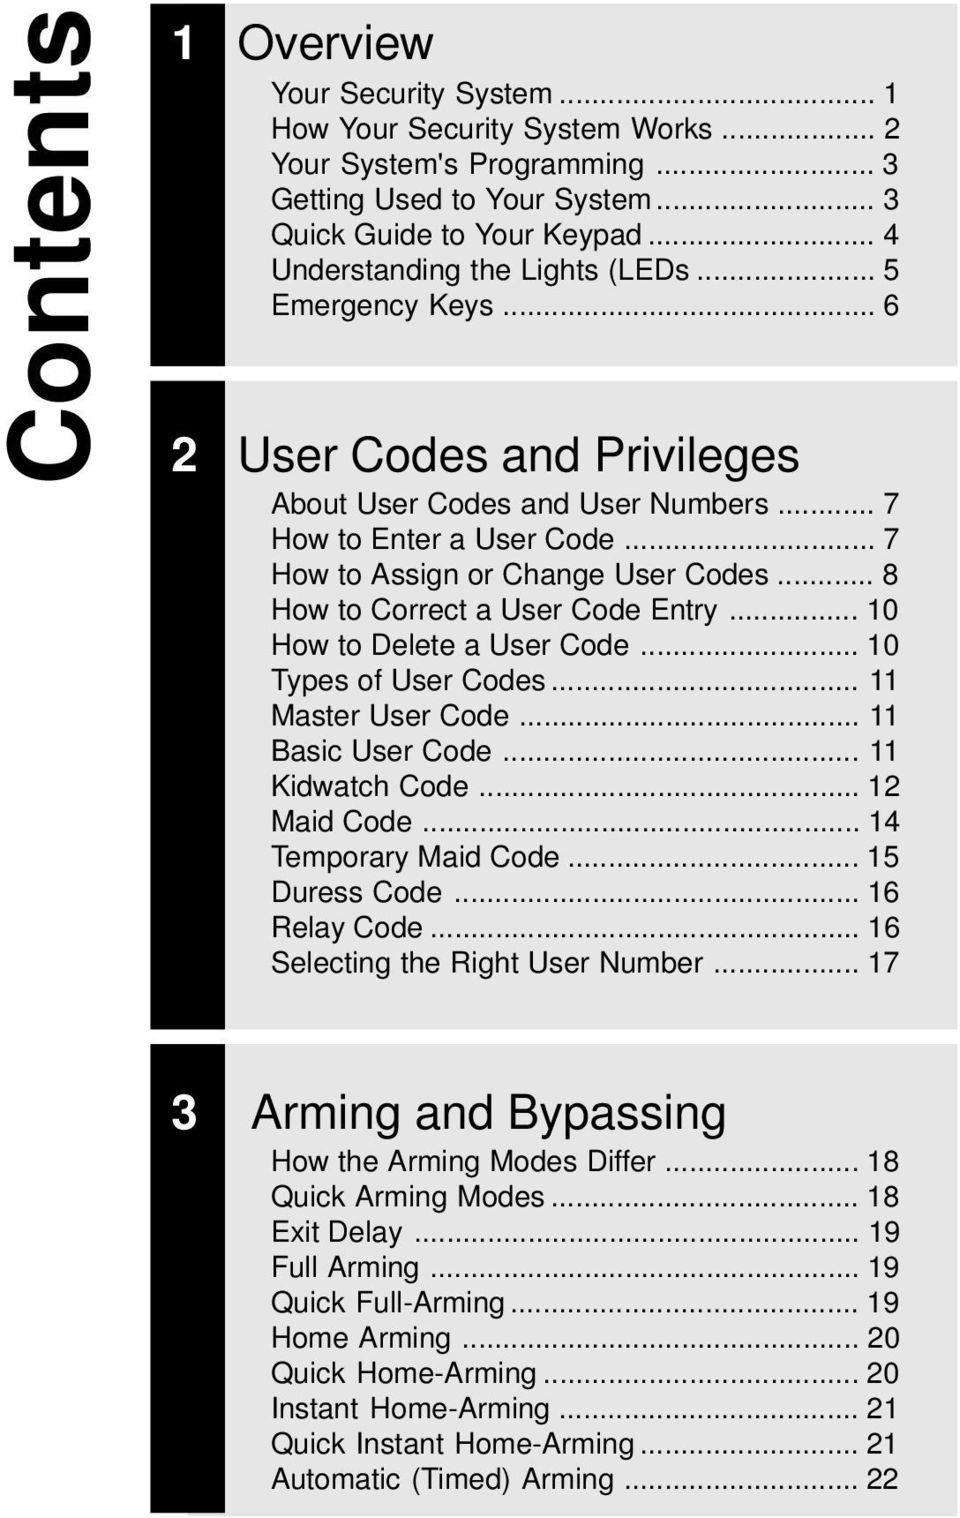 .. 8 How to Correct a User Code Entry... 10 How to Delete a User Code... 10 Types of User Codes... 11 Master User Code... 11 Basic User Code... 11 Kidwatch Code... 12 Maid Code.